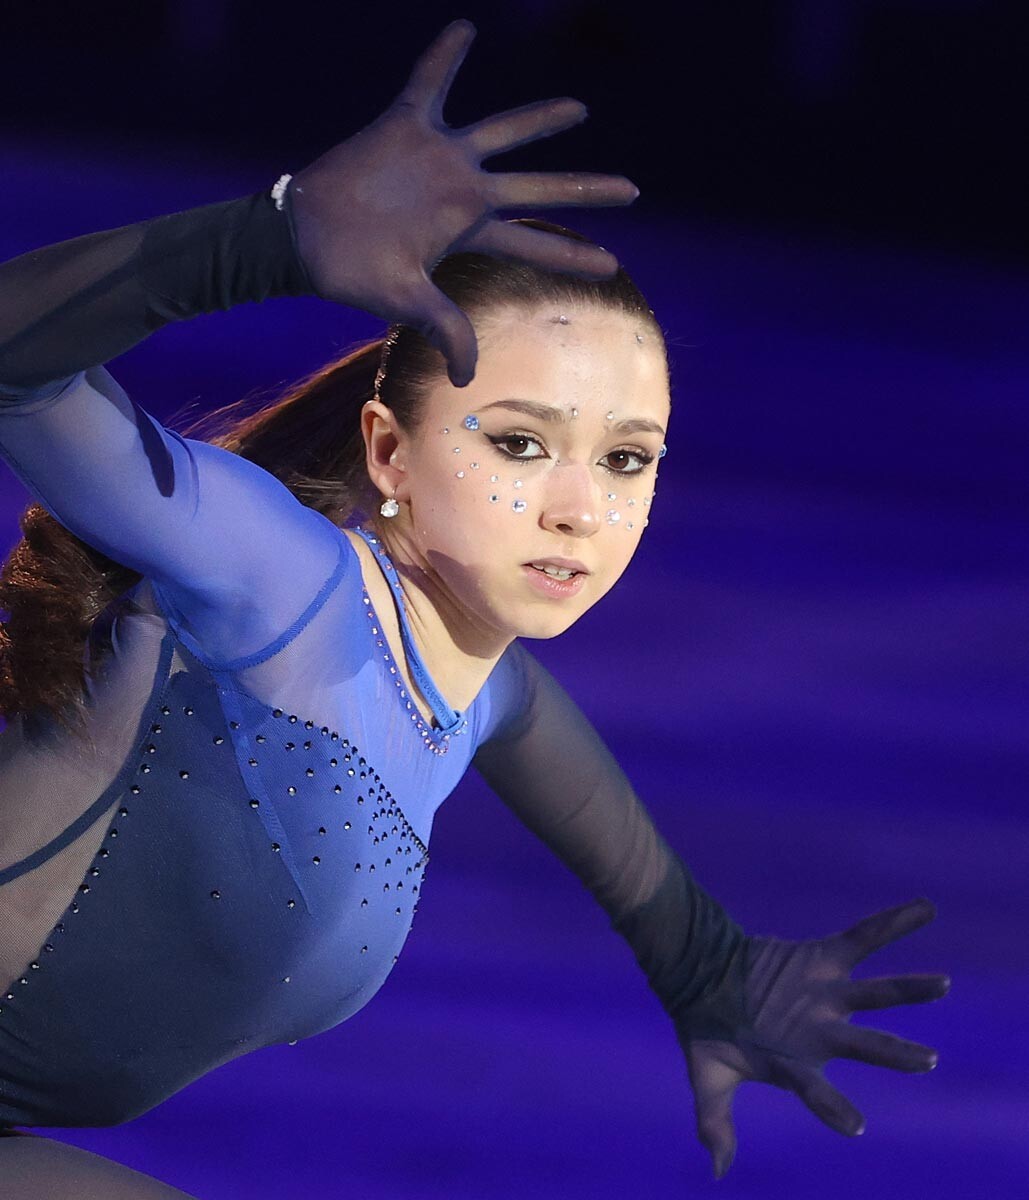 Meet the Russian figure skaters of the 2022 Winter Olympics (PHOTOS